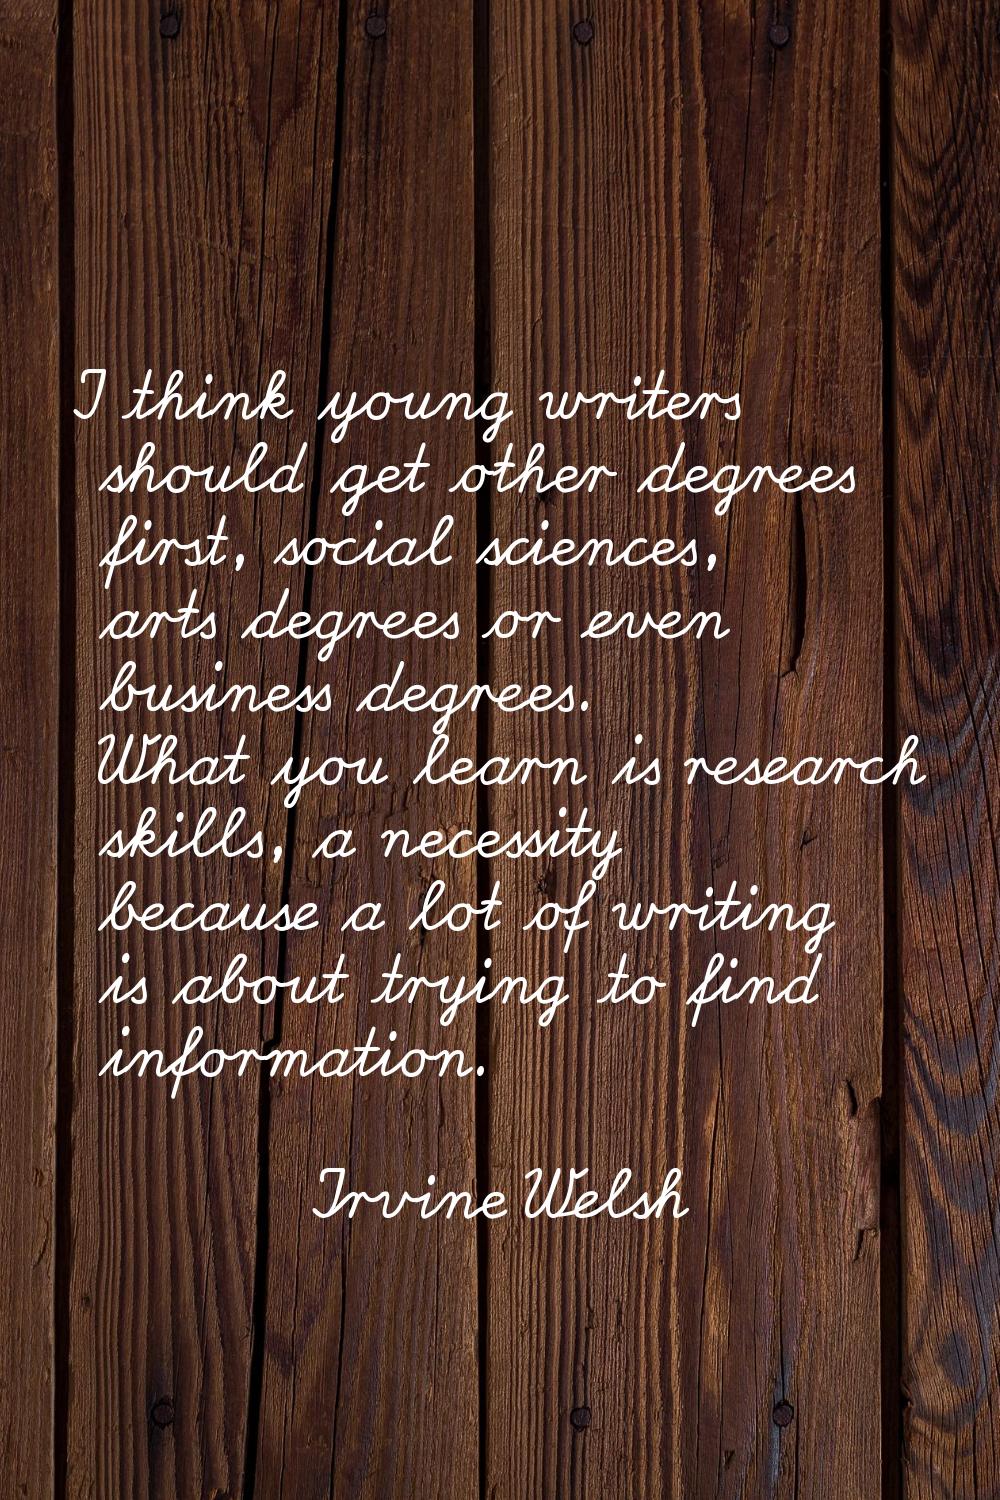 I think young writers should get other degrees first, social sciences, arts degrees or even busines